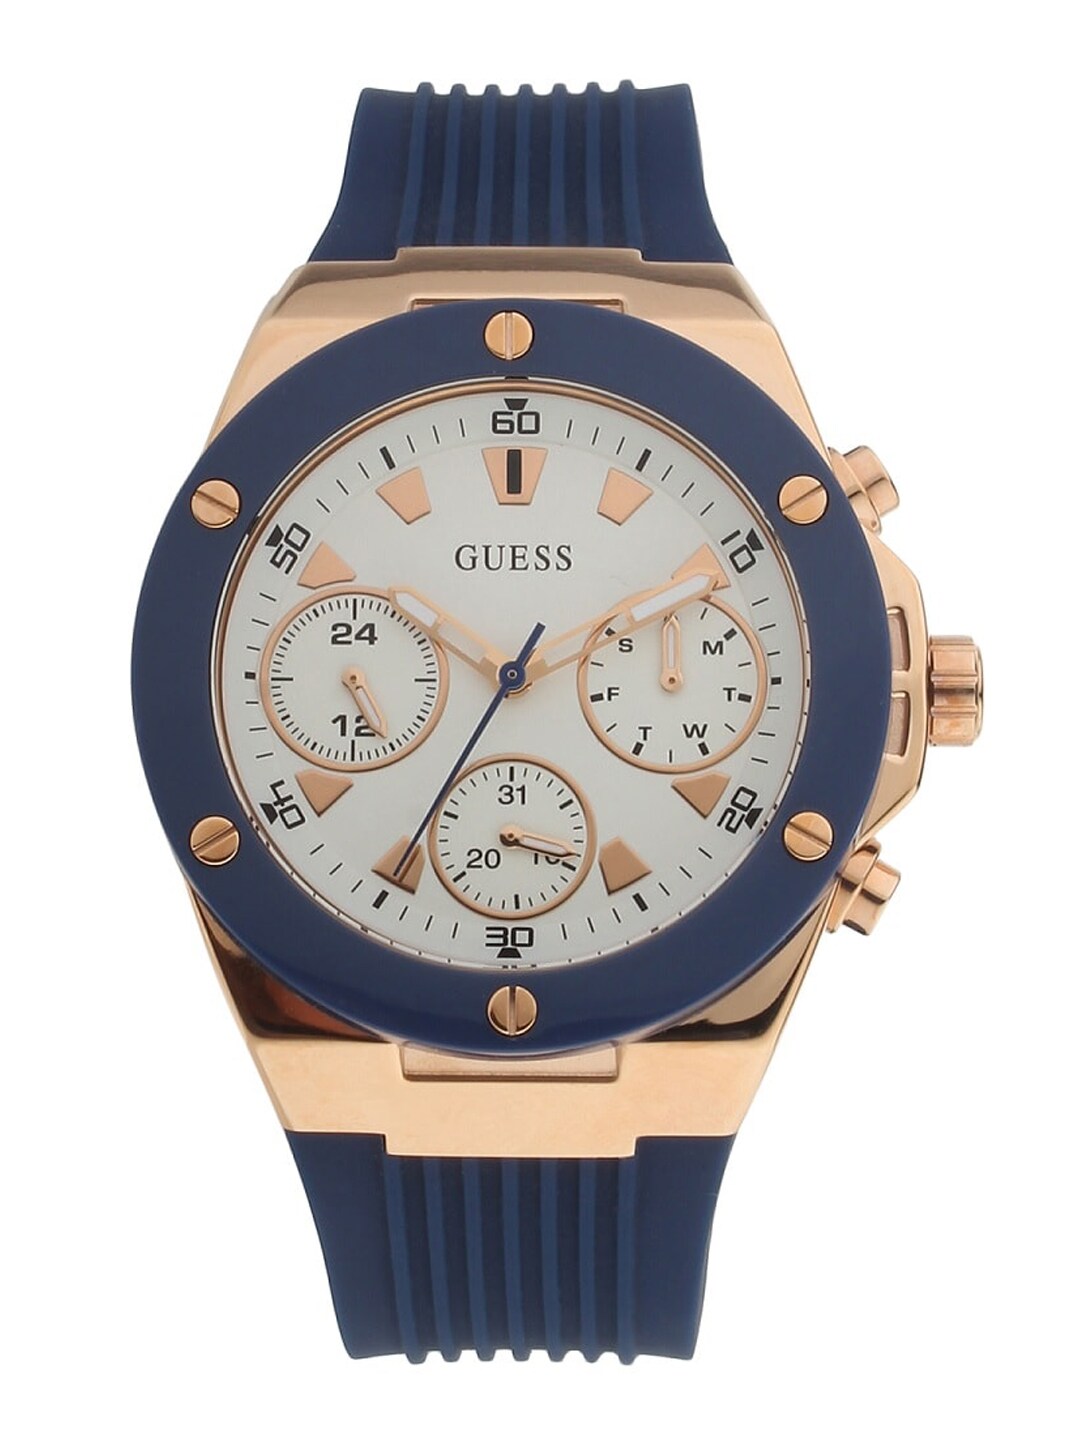 GUESS Women Blue Analogue Watch Price in India